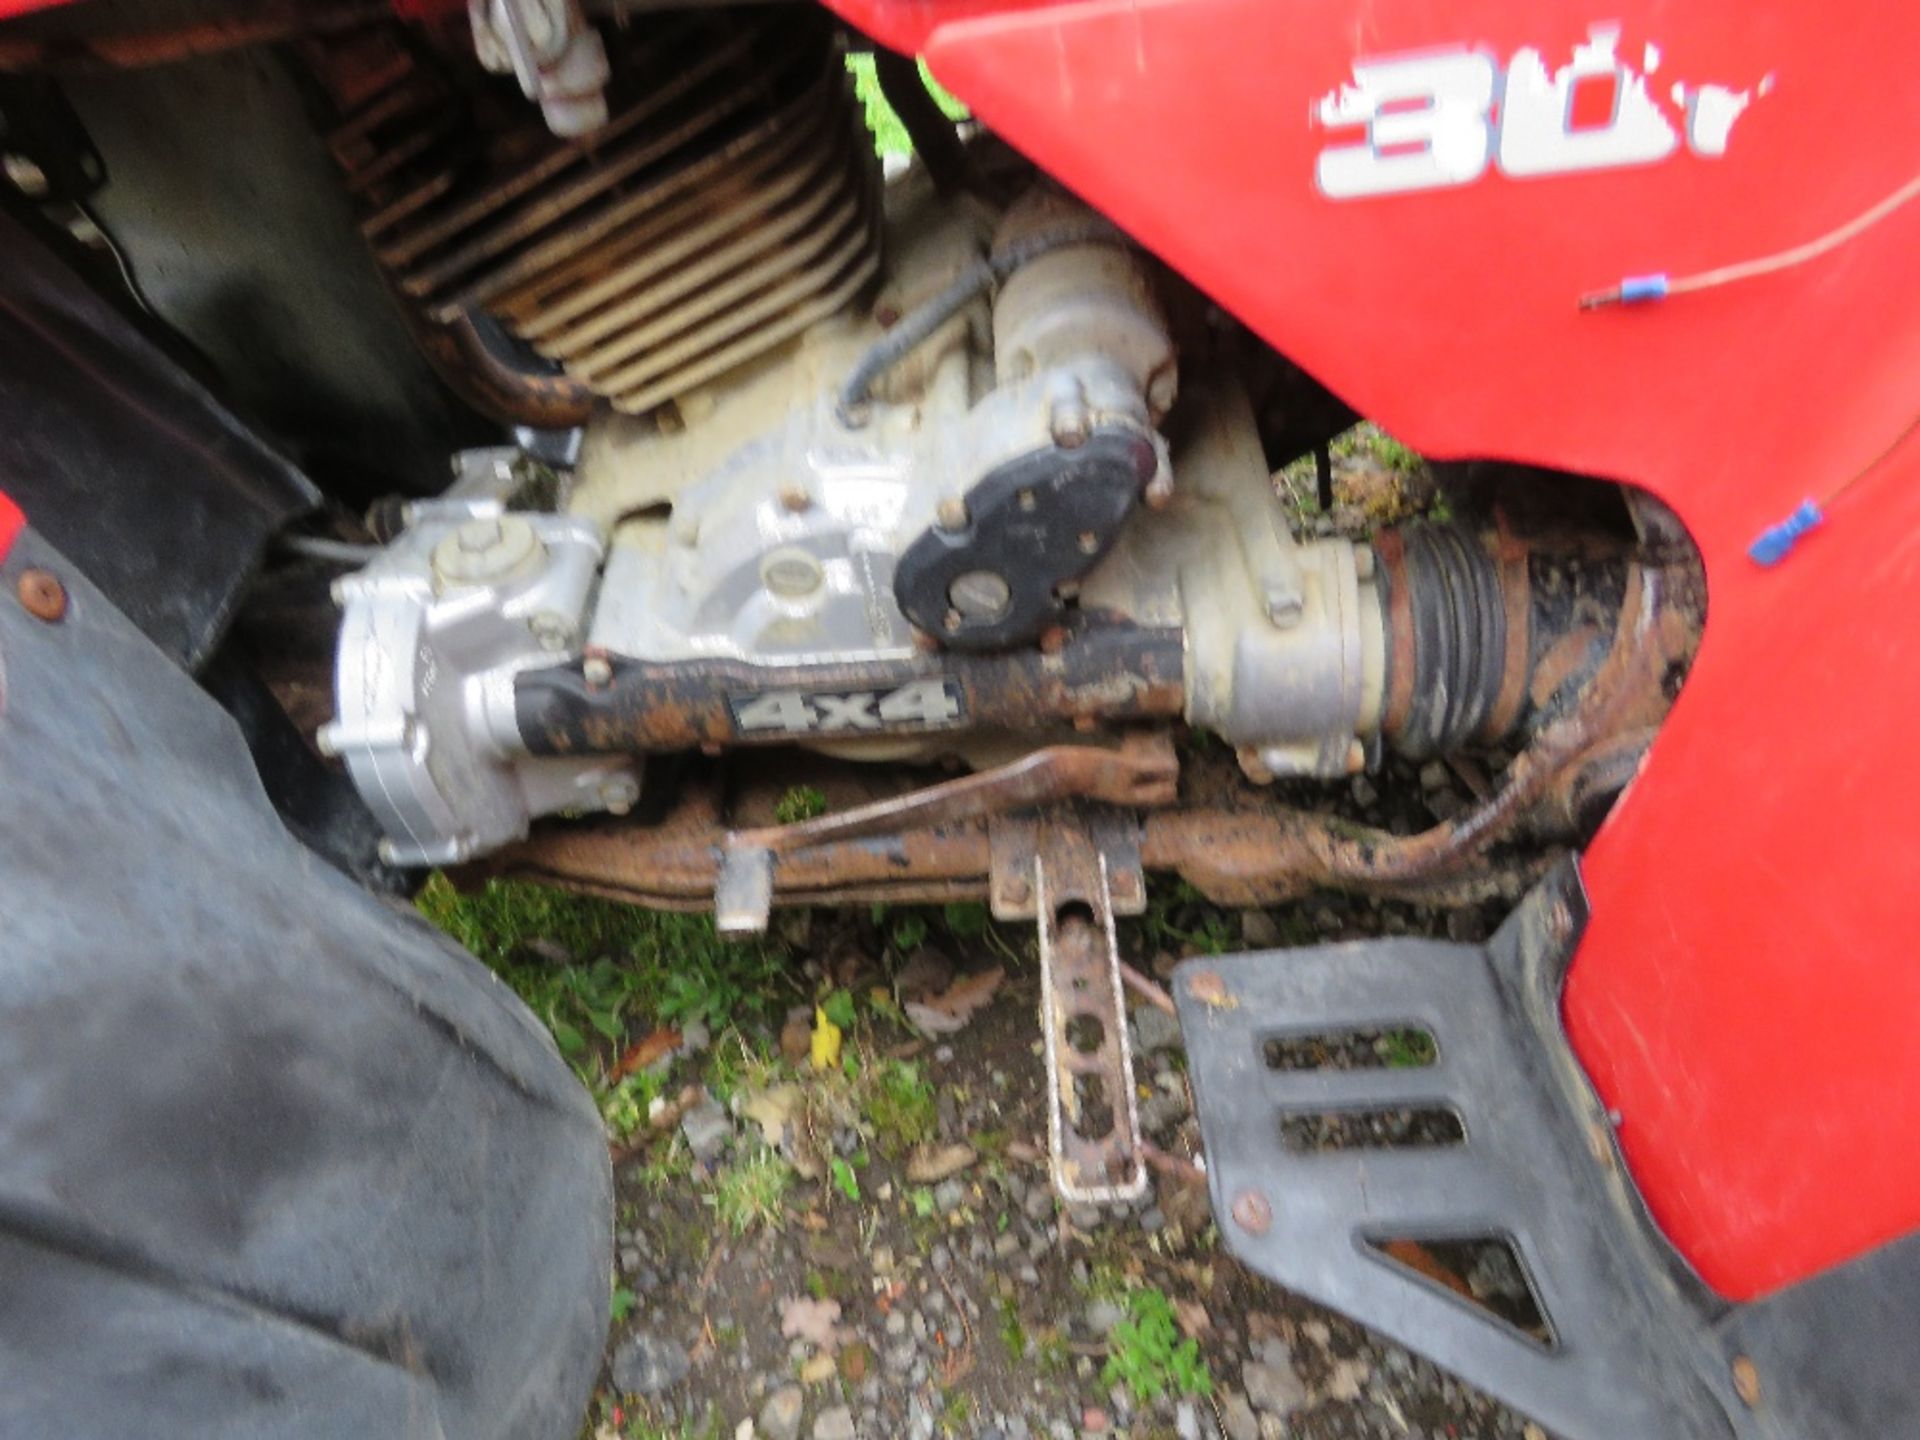 HONDA BIG RED 4WD PETROL ENGINED QUAD BIKE. WHEN TESTED WAS SEEN TO DRIVE, STEER AND BRAKE SOURCED F - Image 8 of 9